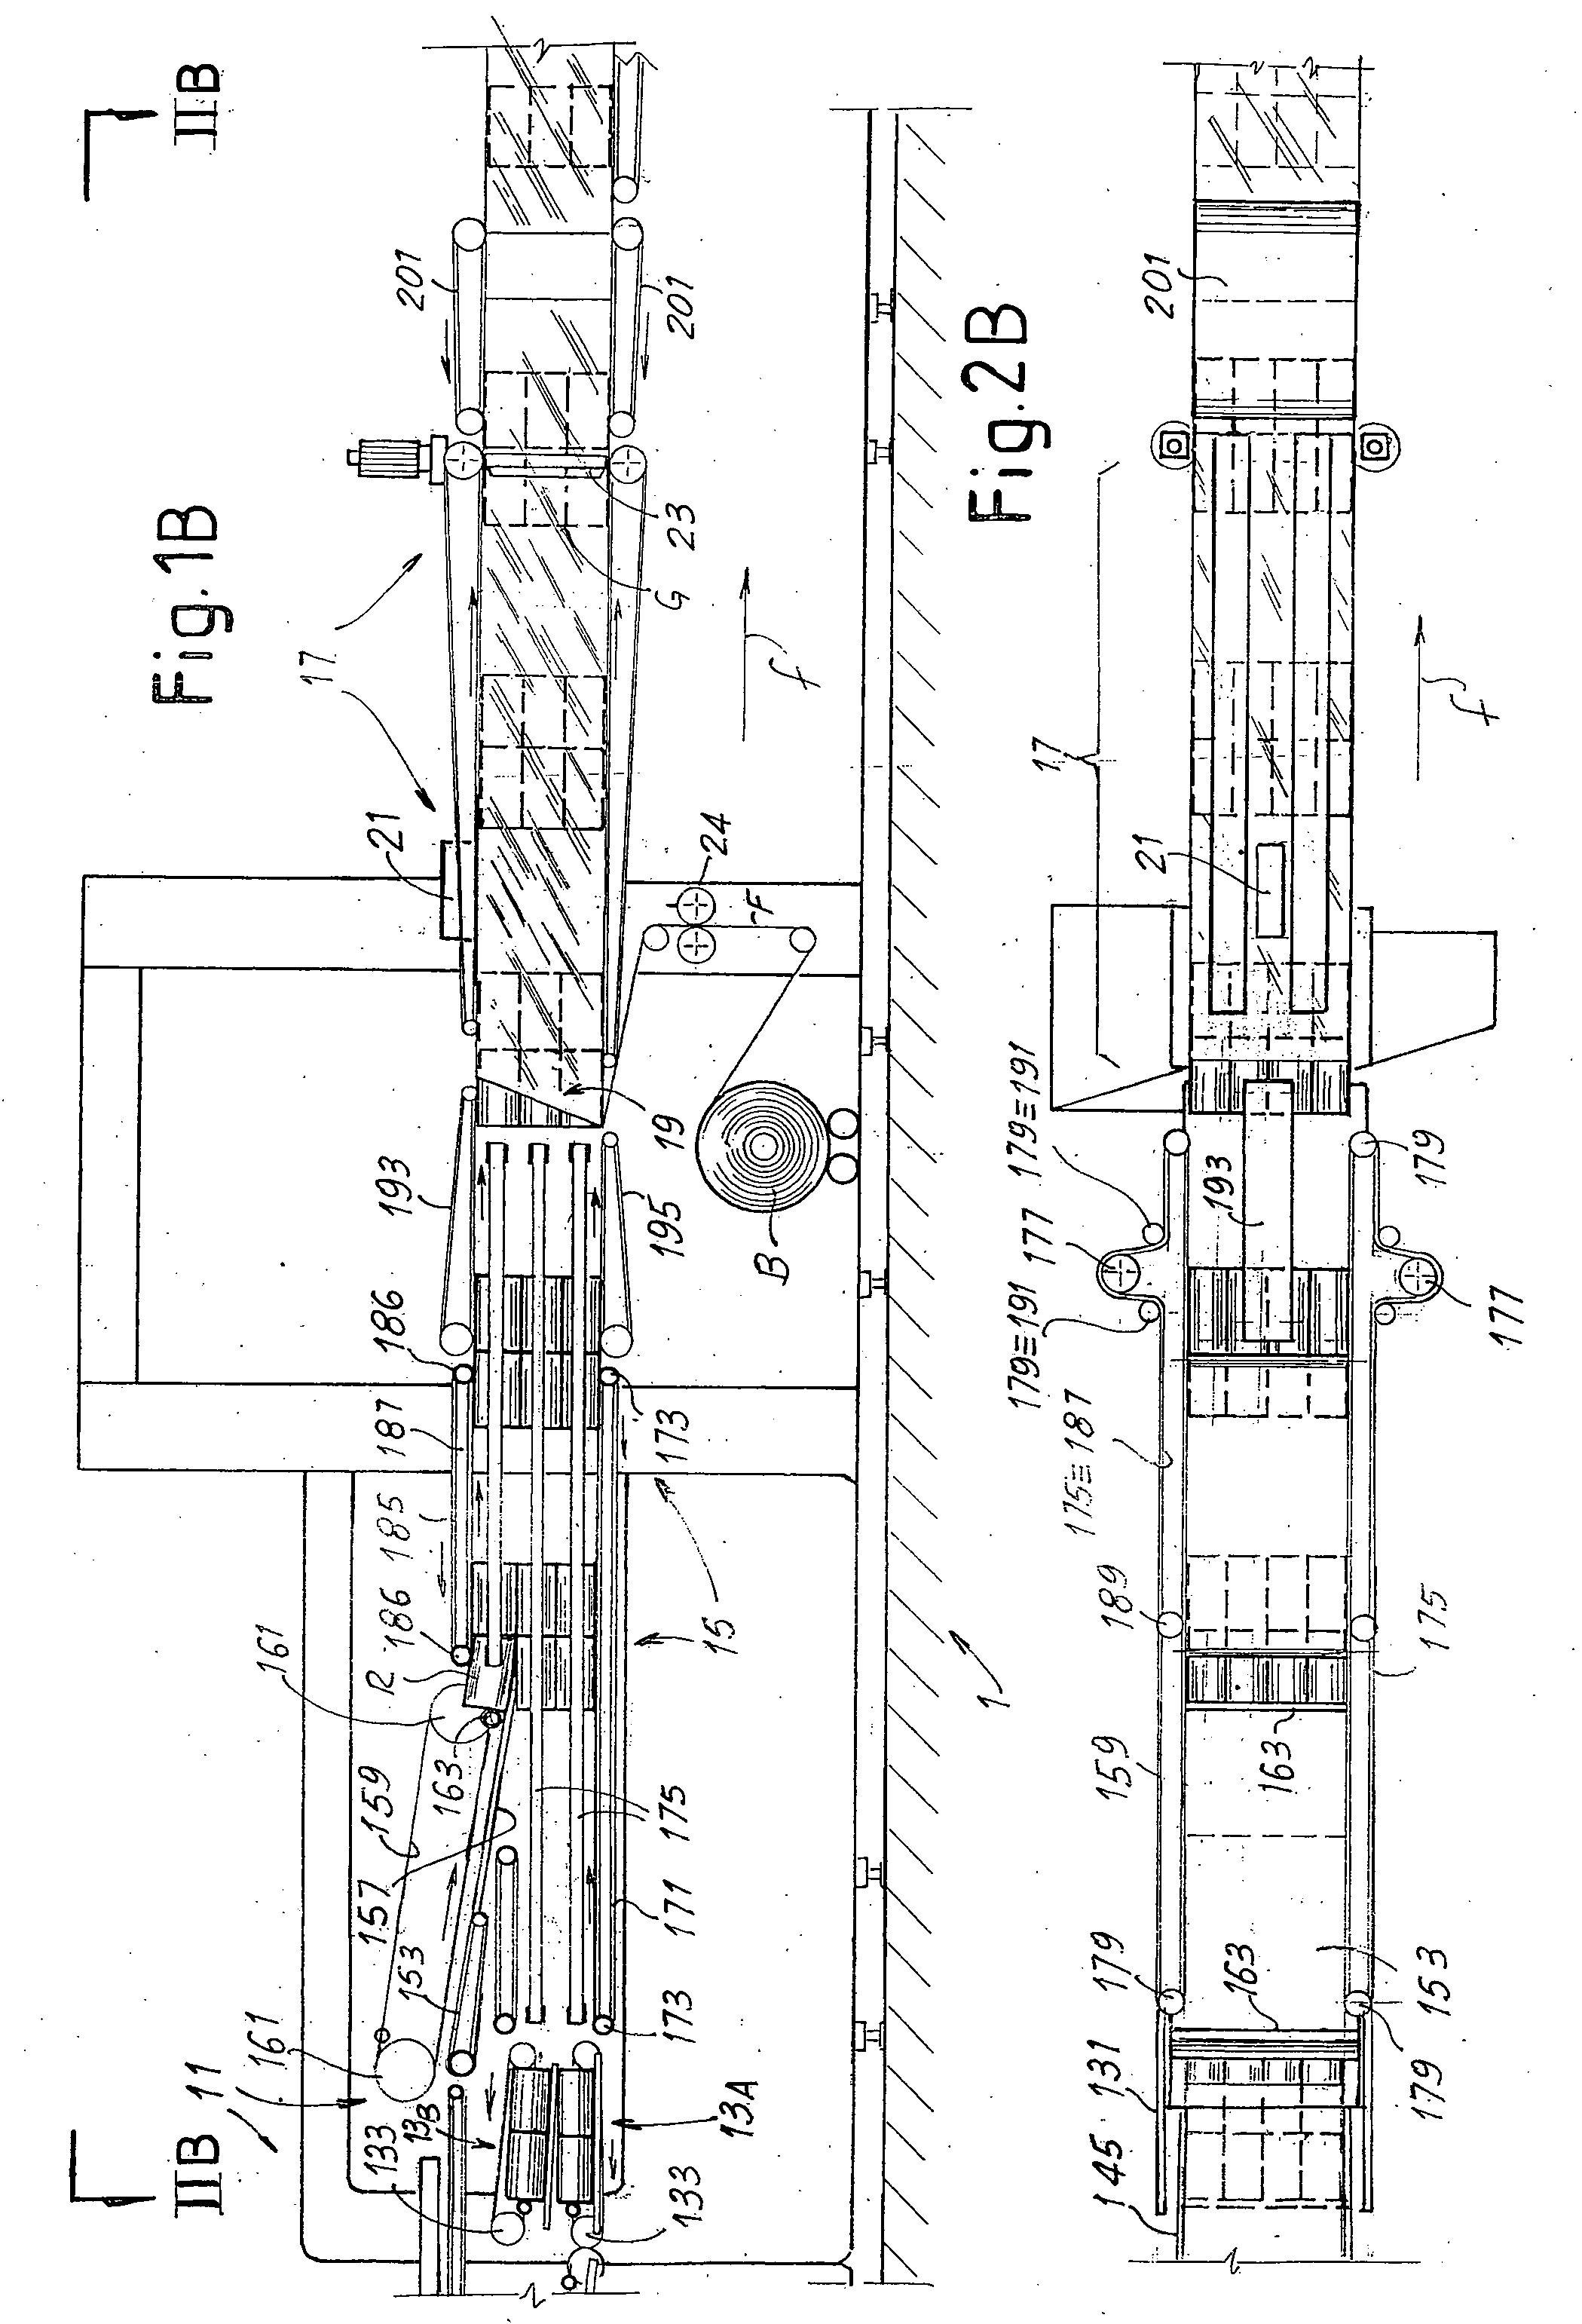 Machine and Method for Packaging Groups of Products